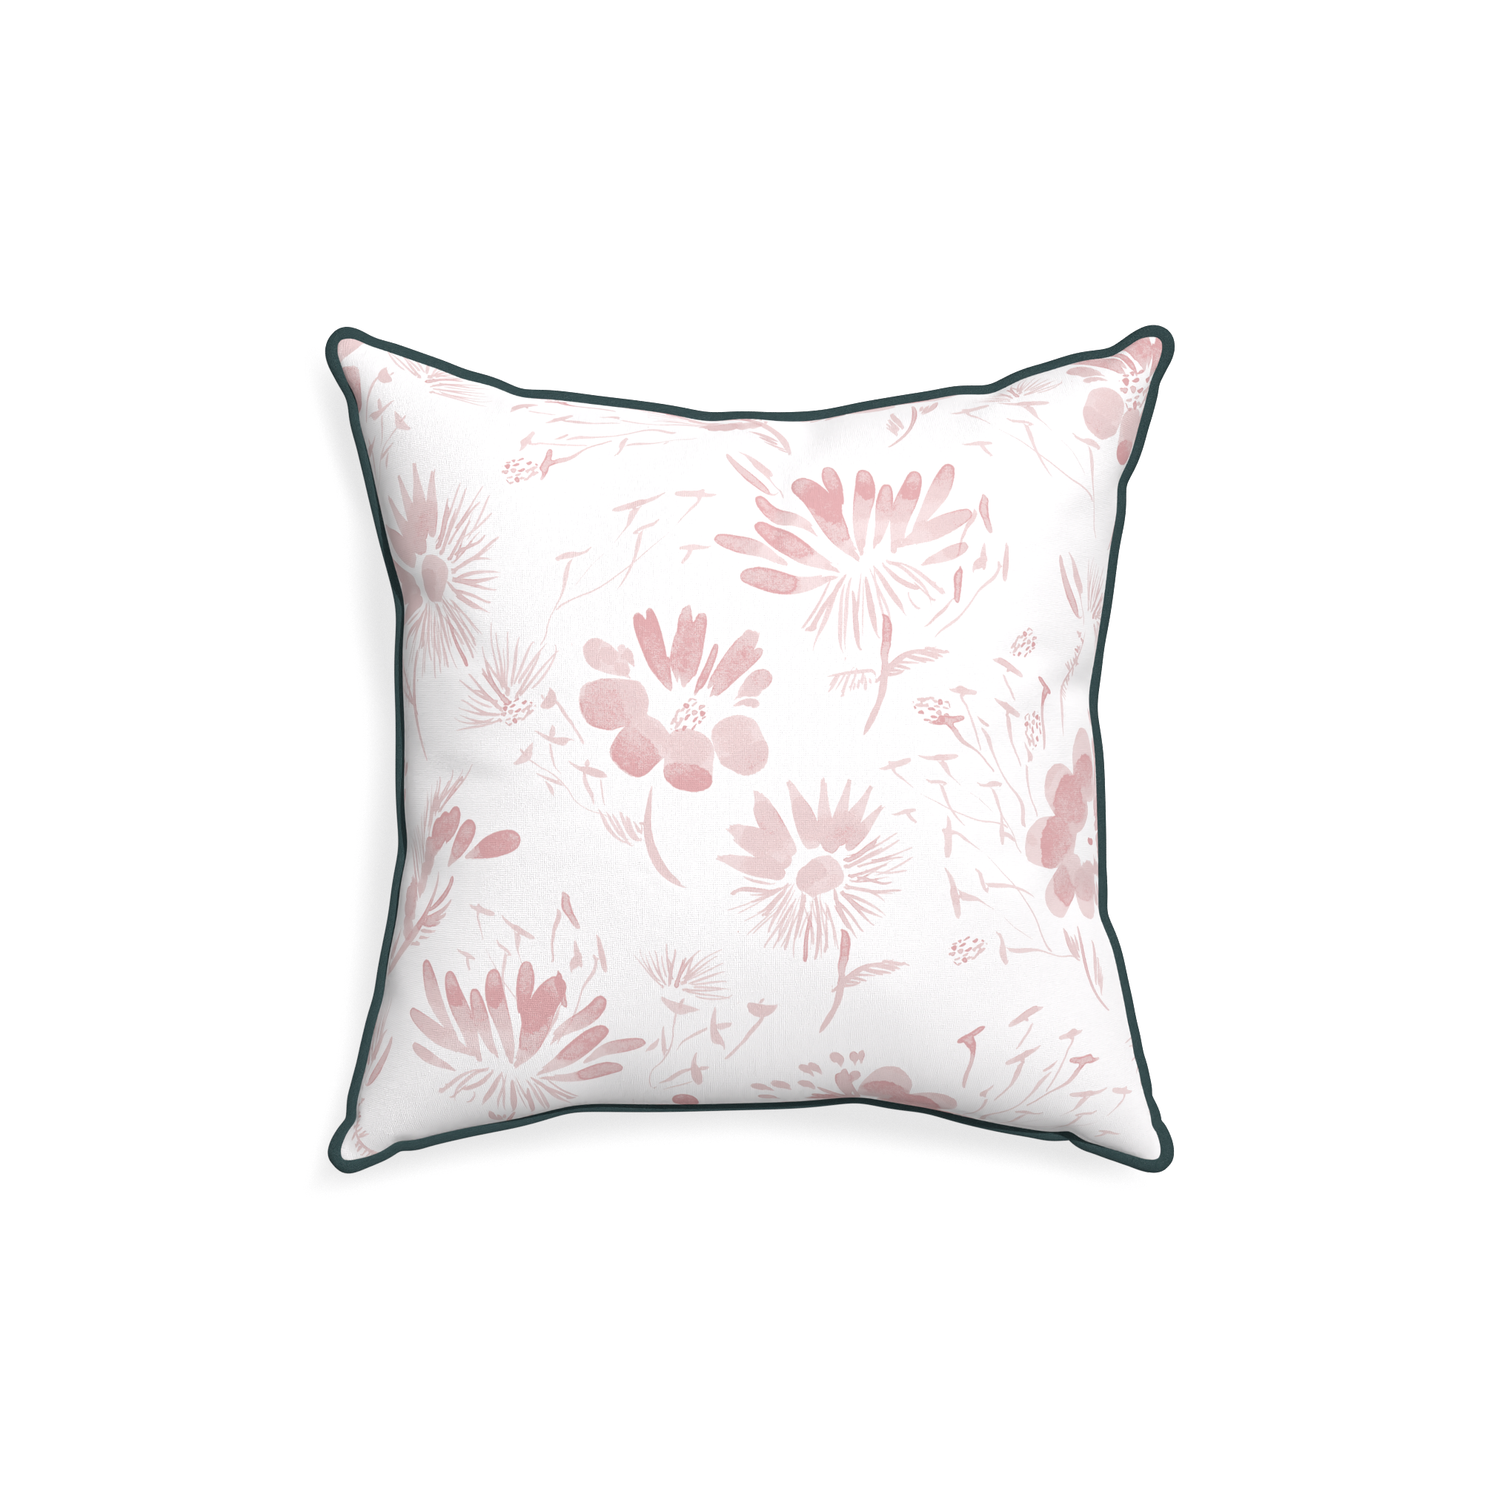 18-square blake custom pink floralpillow with p piping on white background